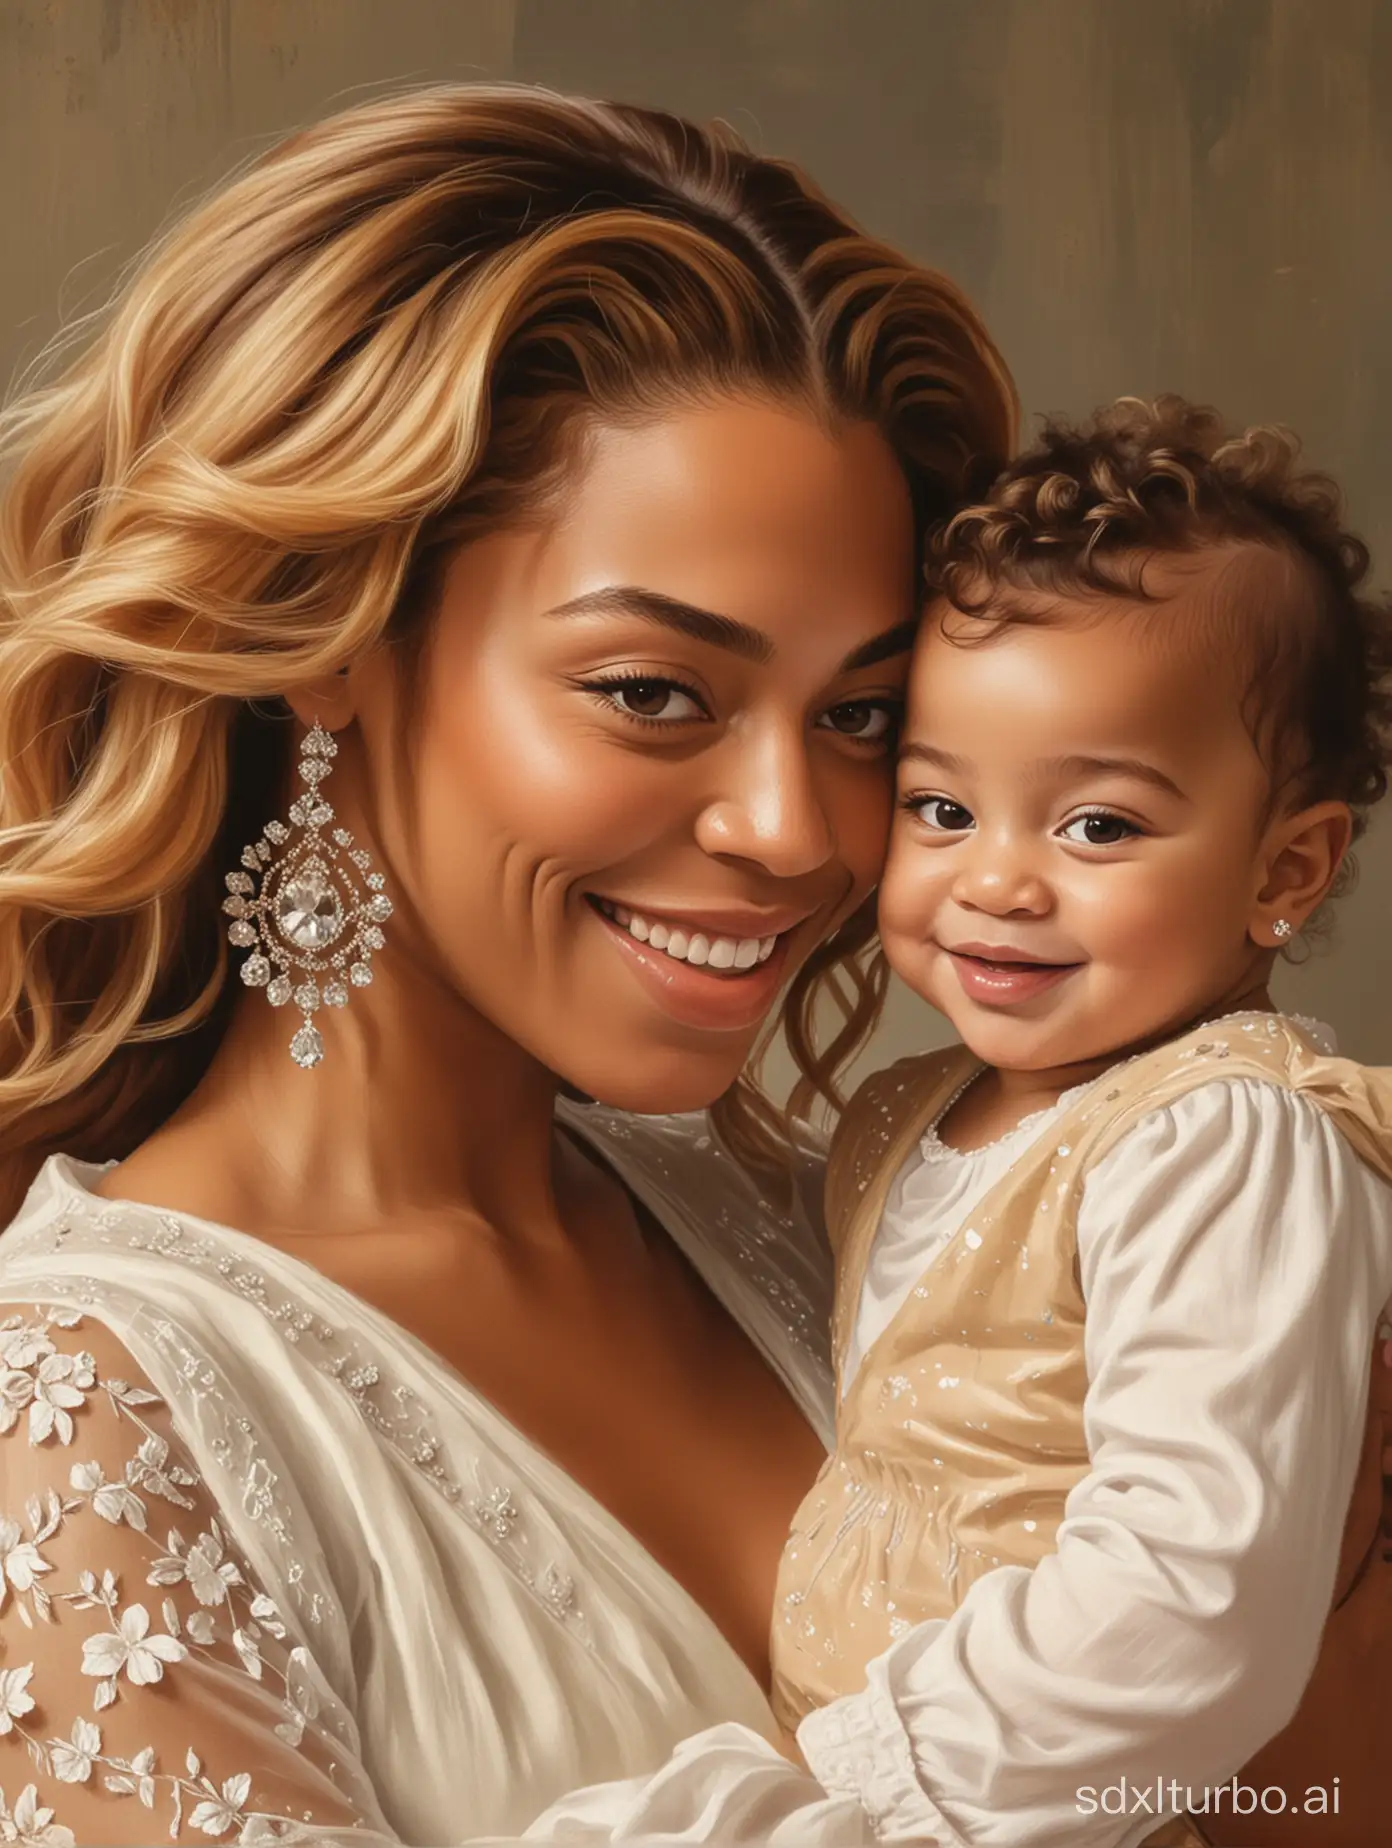 Delicate painting, masterpiece, Beyoncé the singer interacting with a baby with a smile👶